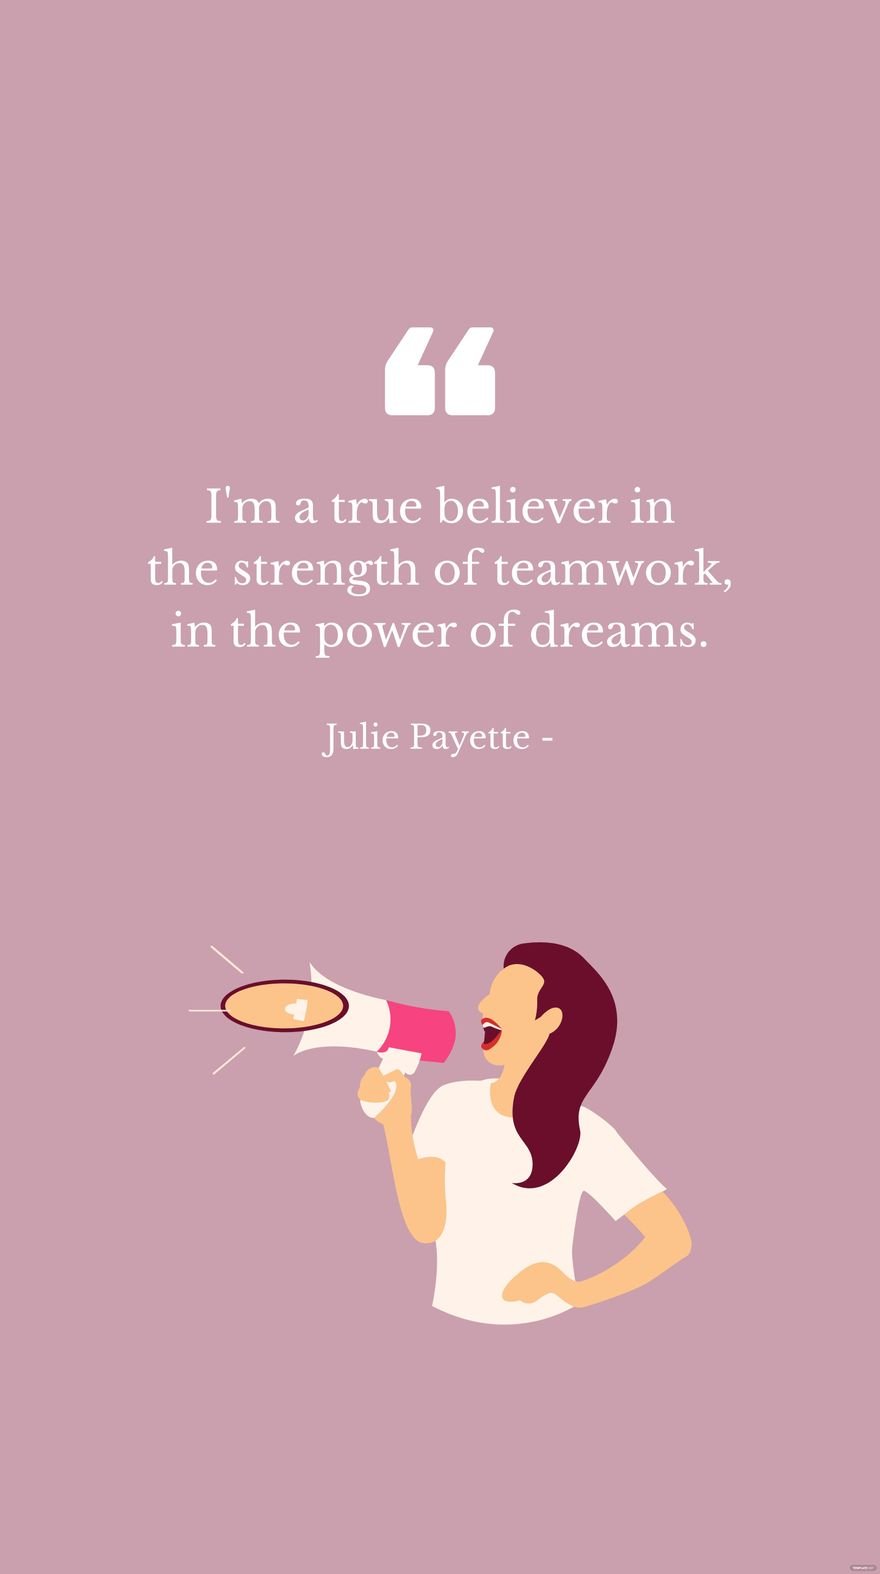 Free Julie Payette - I'm a true believer in the strength of teamwork, in the power of dreams.